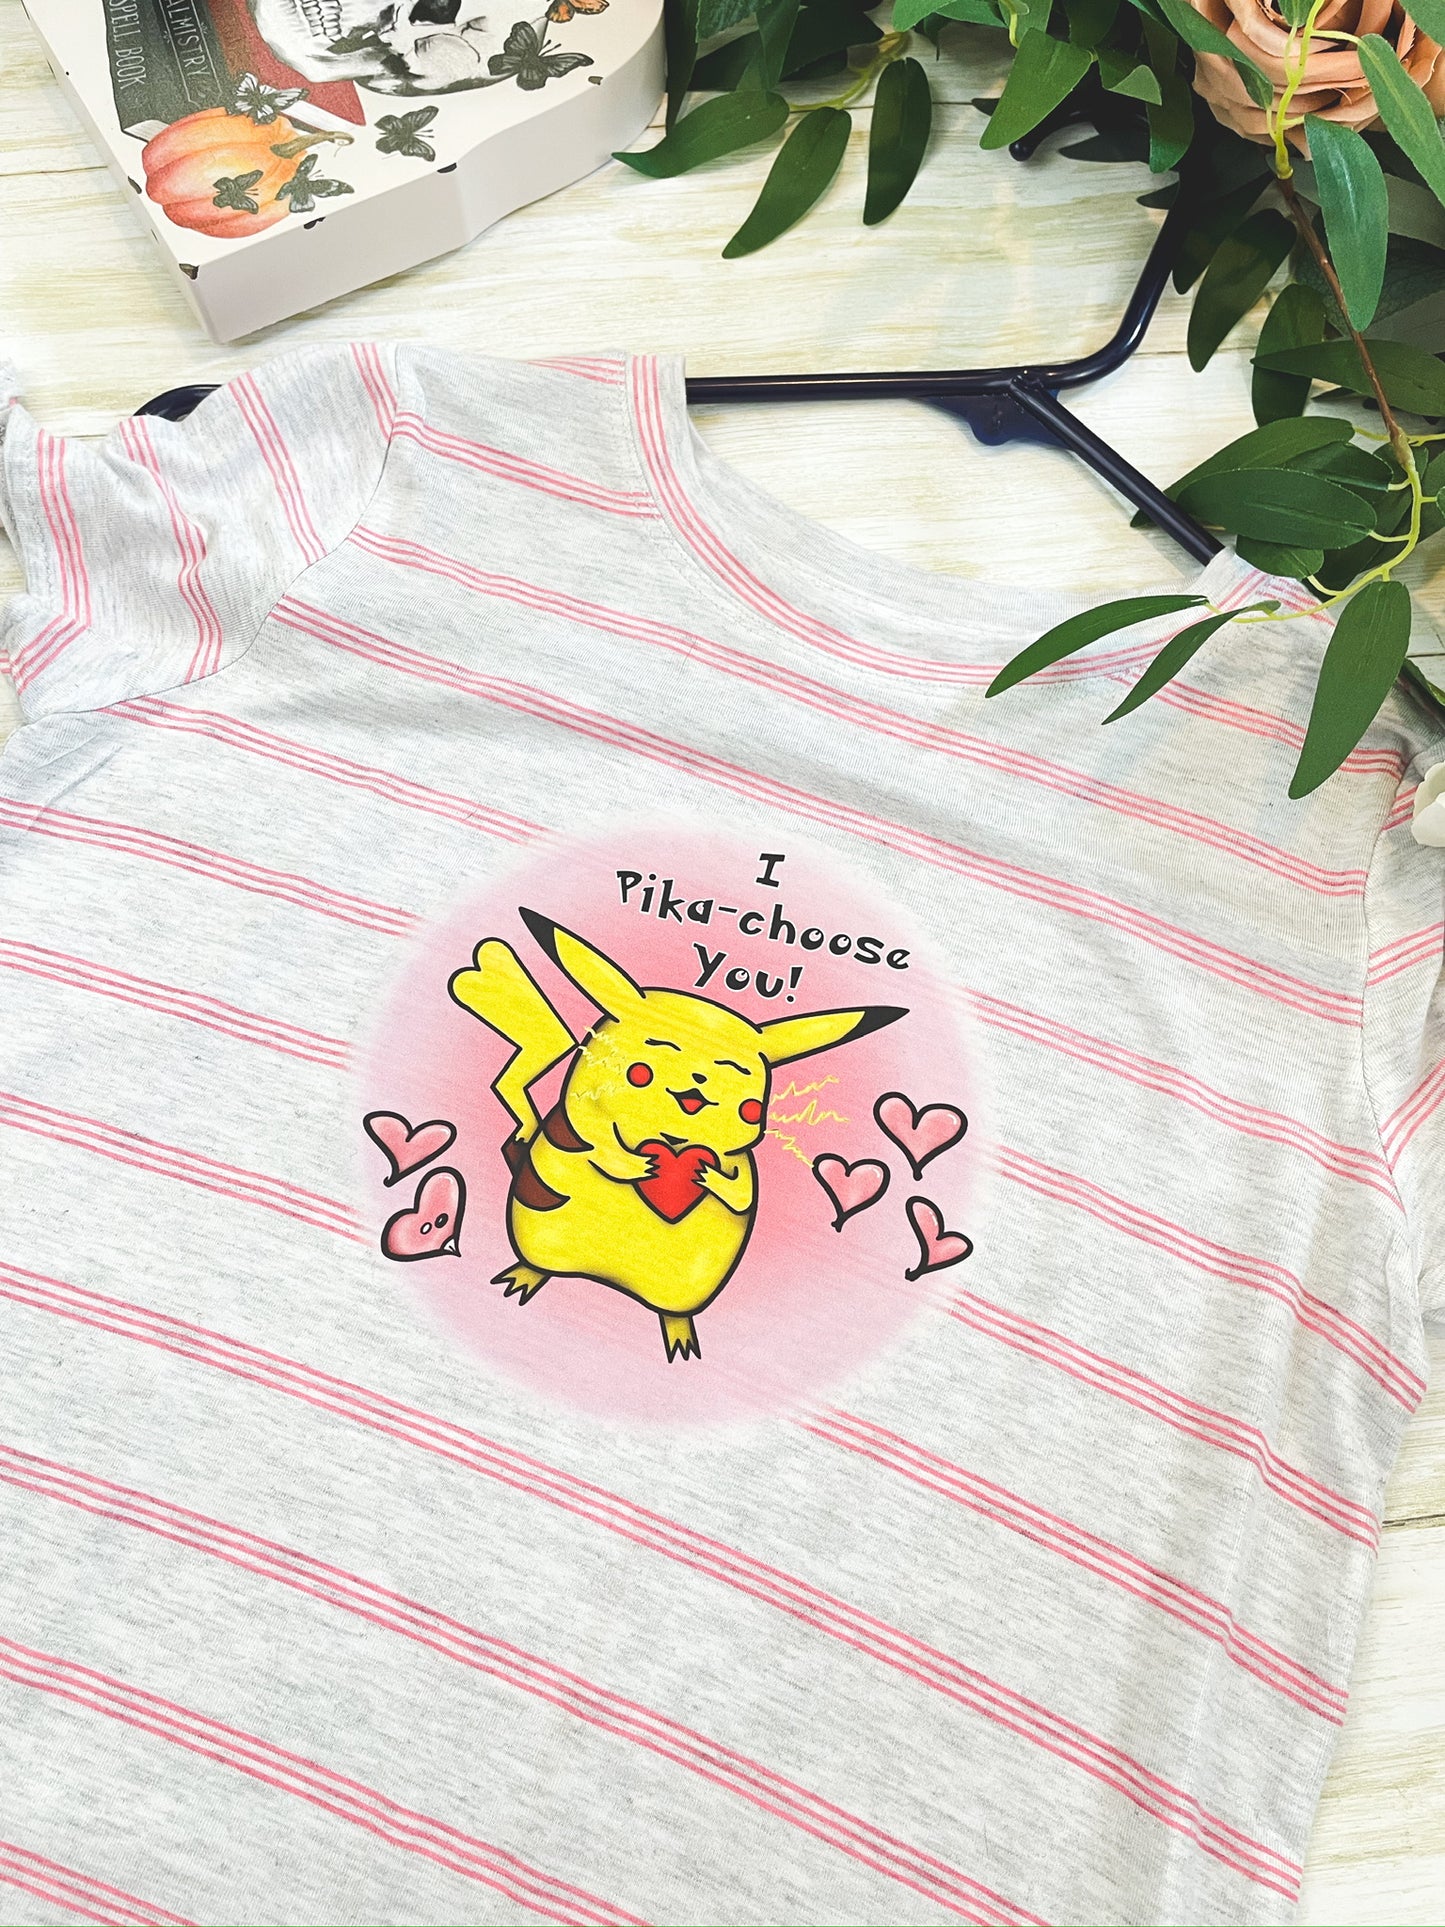 Thrifted - Youth Medium - "The I Pika-choose You!"